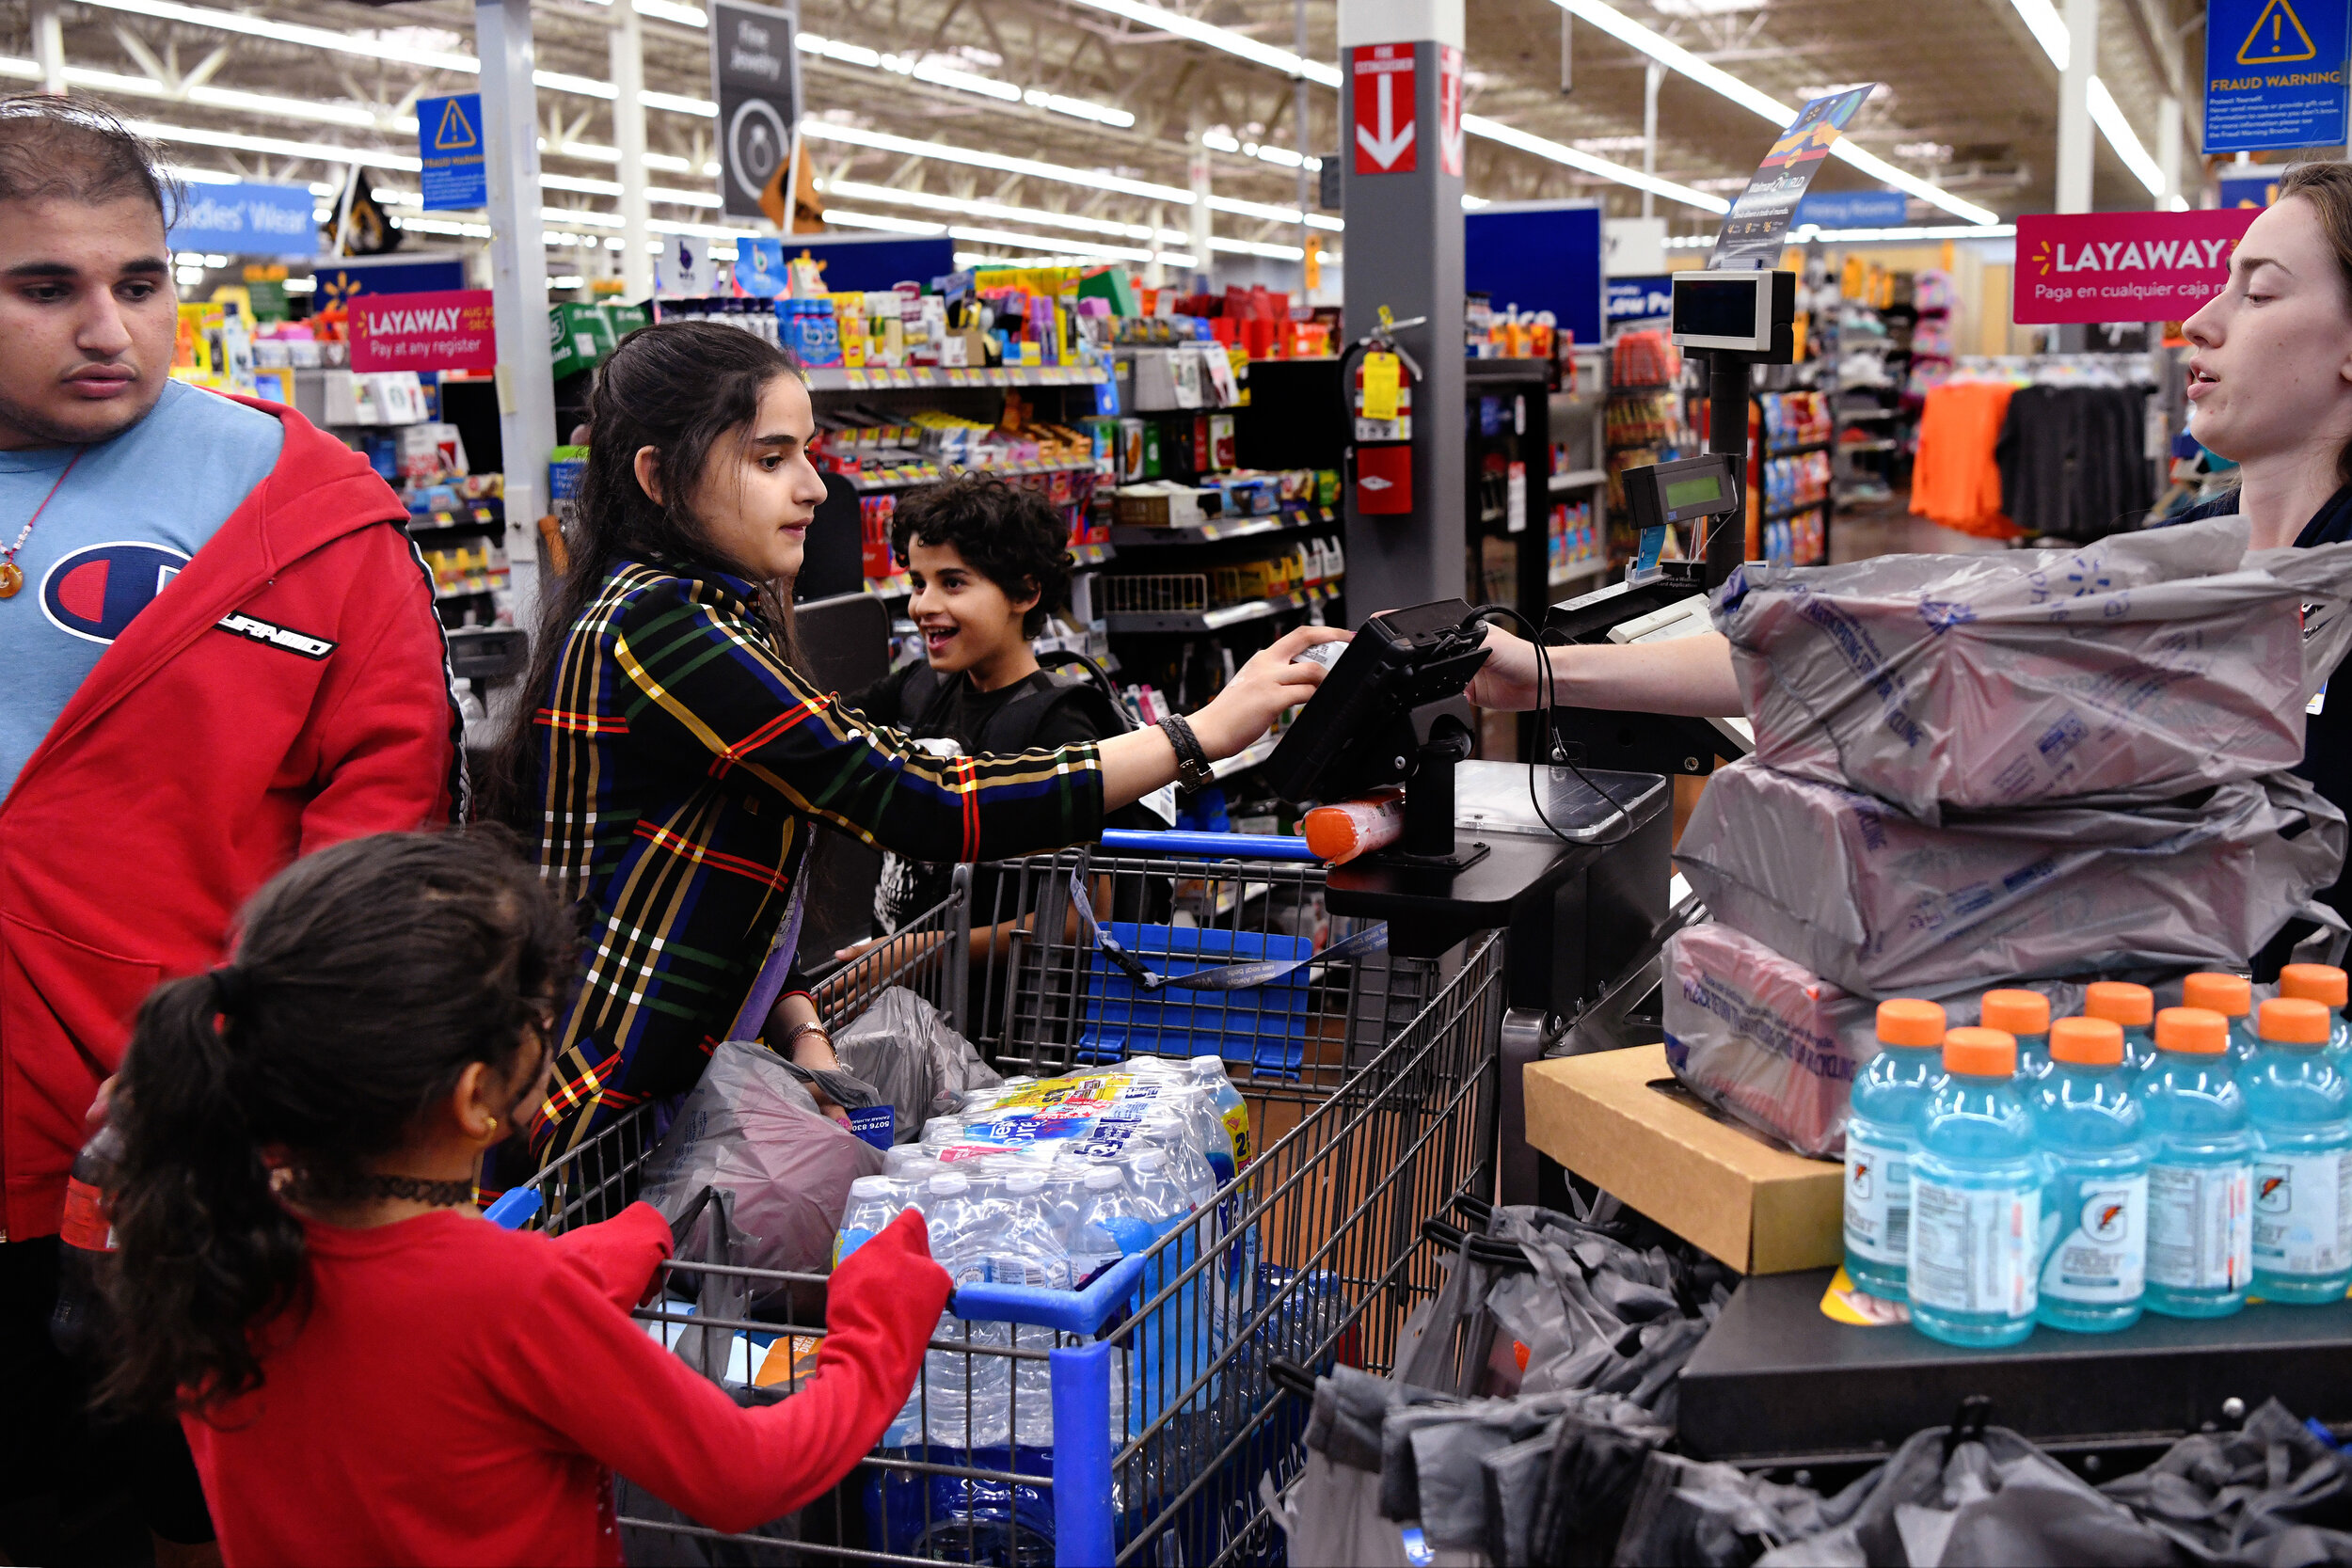  Narjes, 14, center, pays for the families groceries with money she got from her mother. Their mother doesn’t speak English on a level high enough to get groceries on her own so she often relies on her oldest children to do everyday tasks that involv